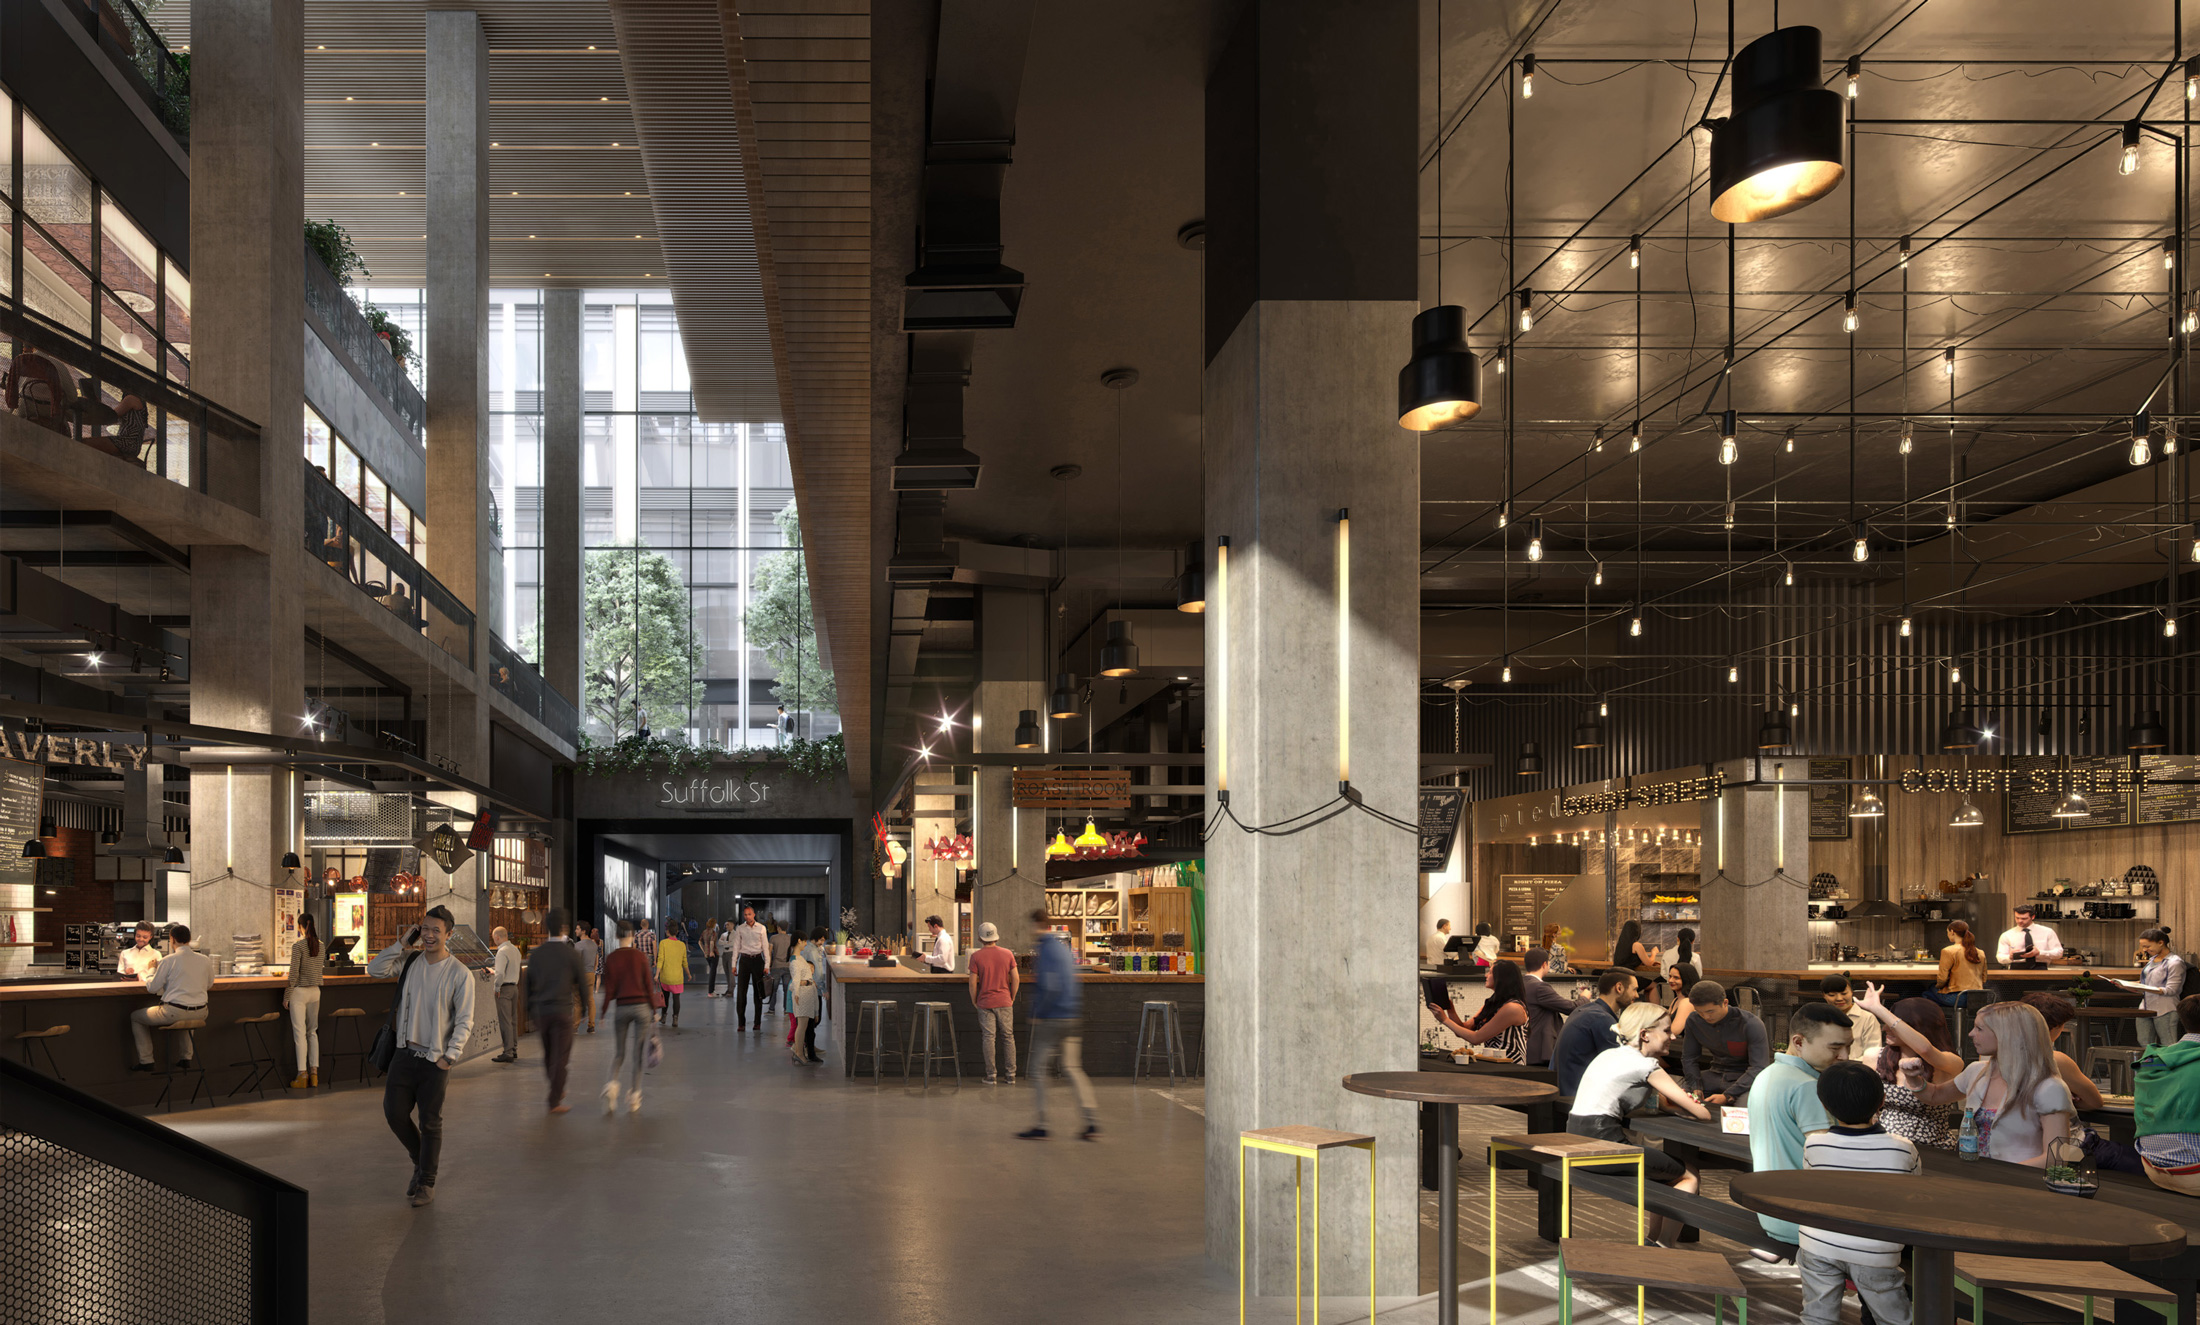 Architectural Rendering of the food court of The Market Line located on Manhattan's Lower East Side, New York City